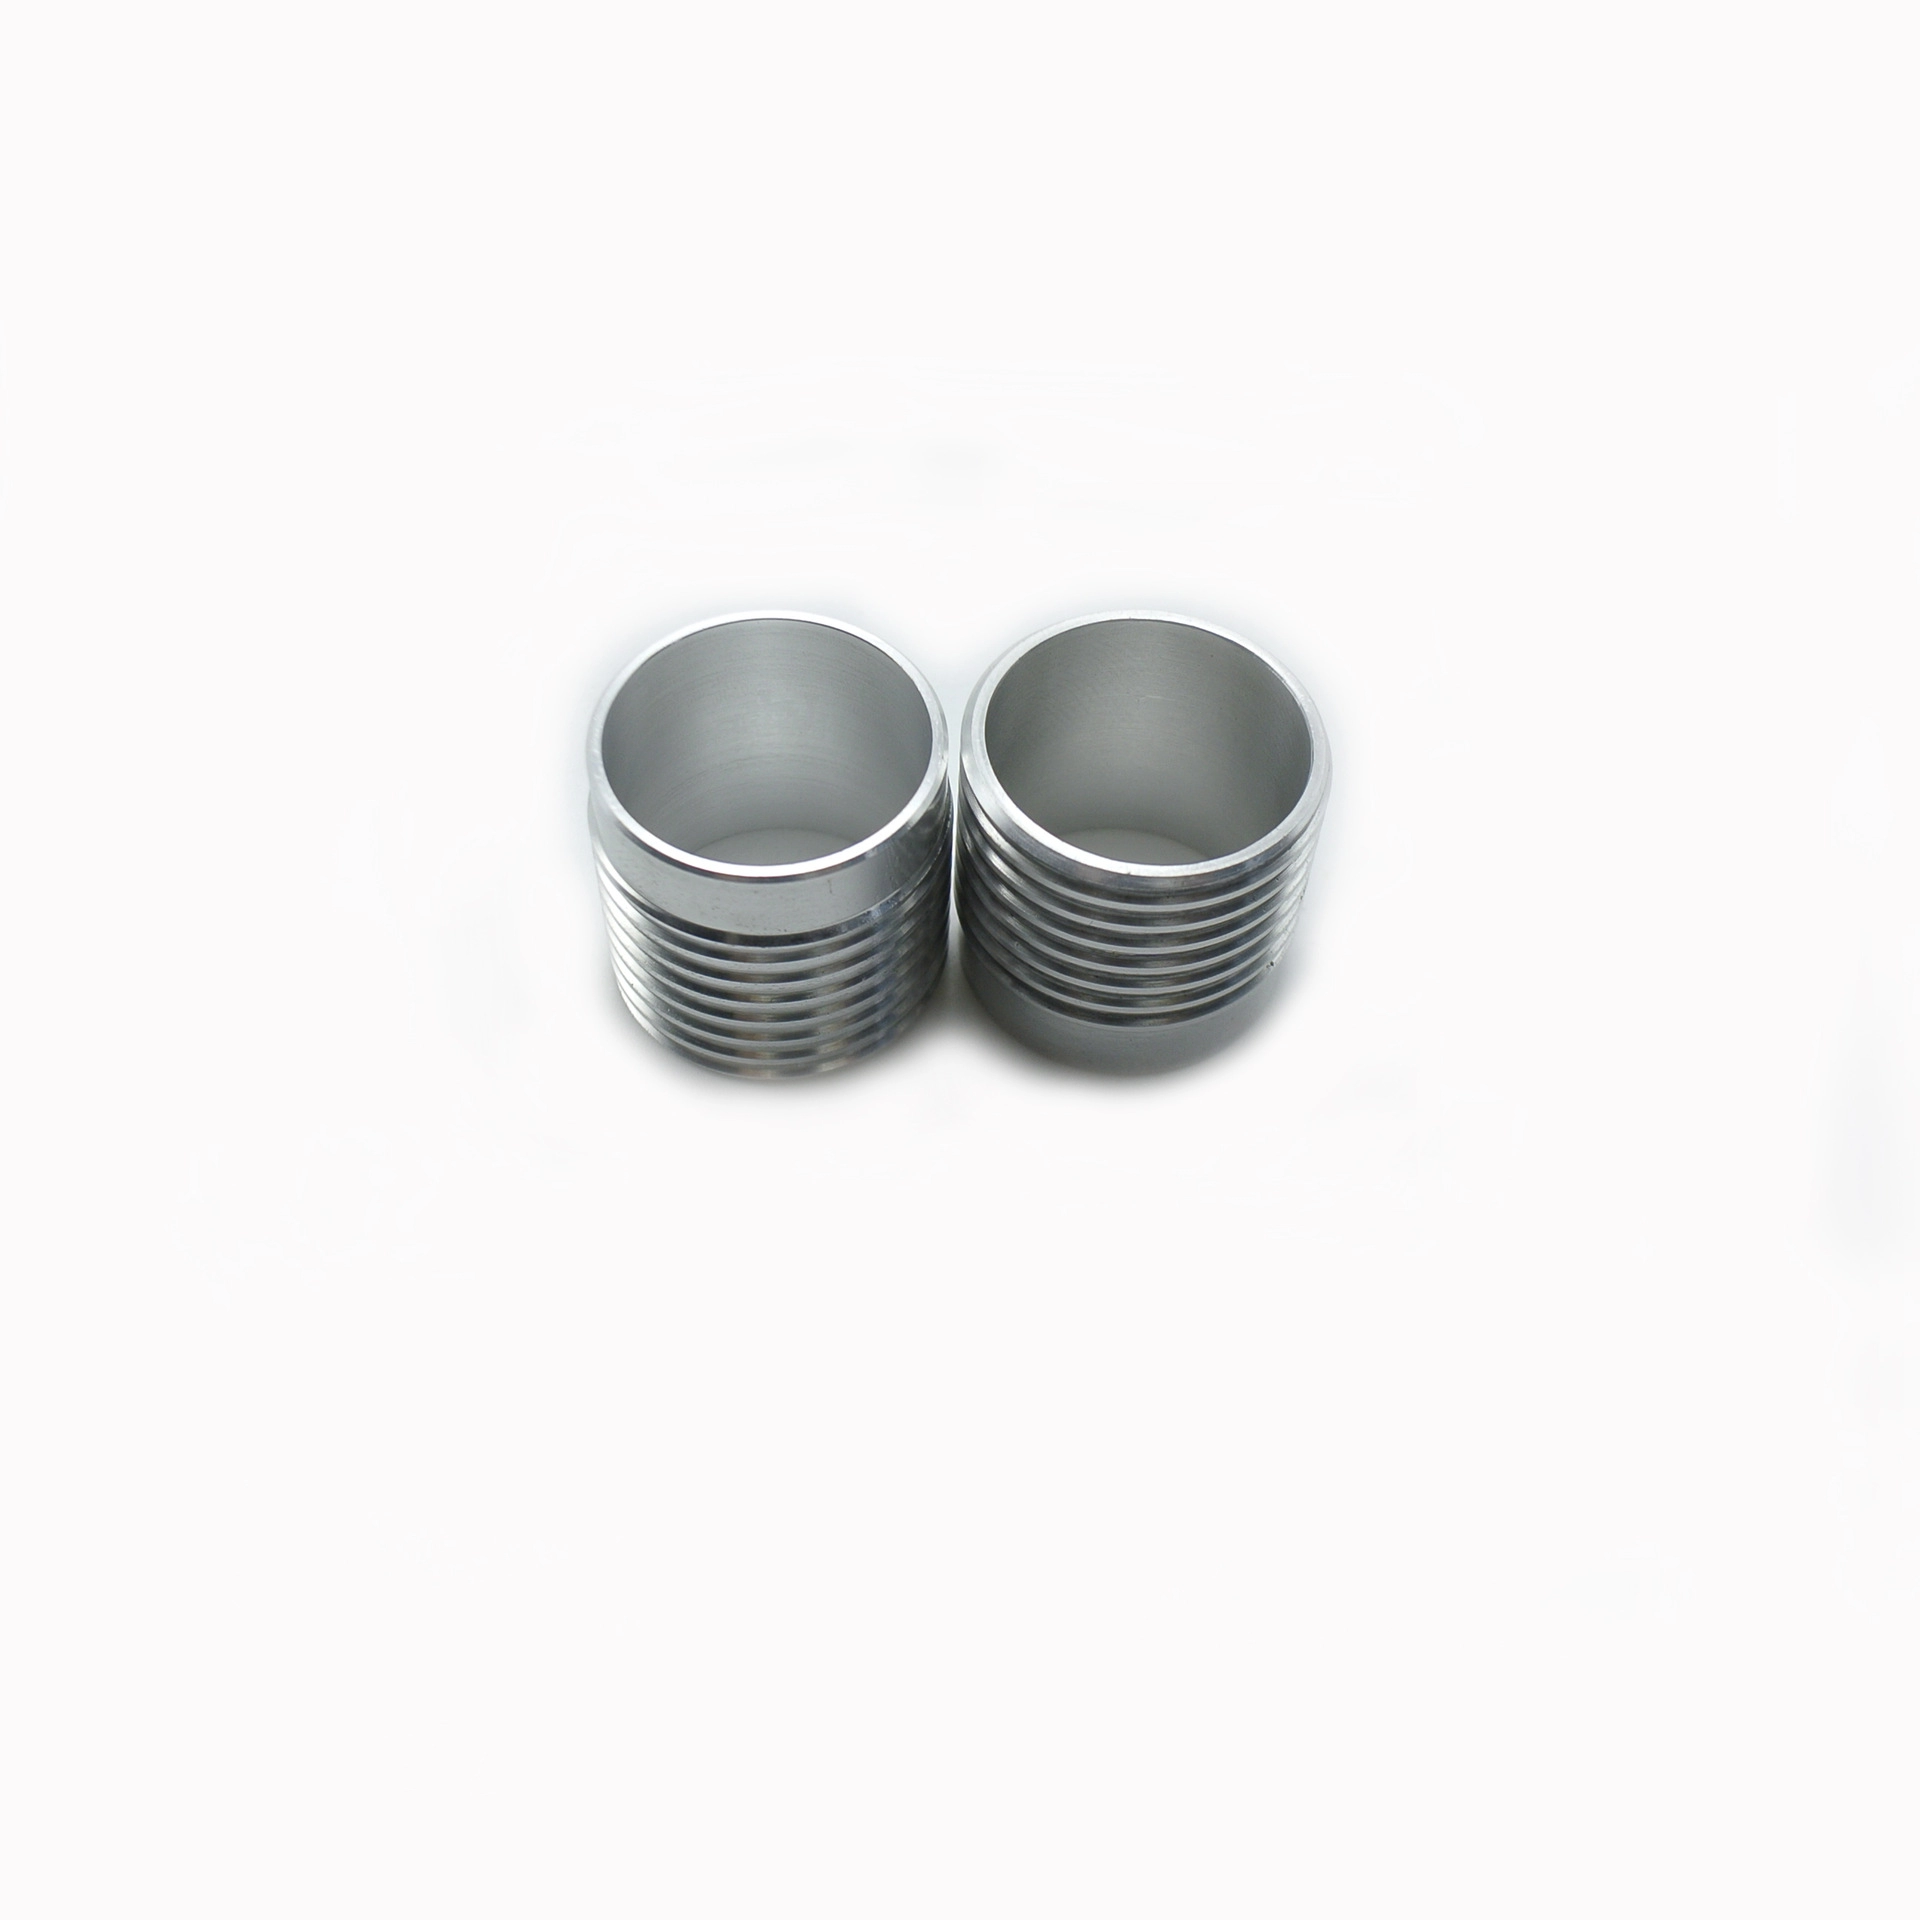 High-Precision Cnc Lathe Processing Aluminum Threaded Parts For Electronic Products